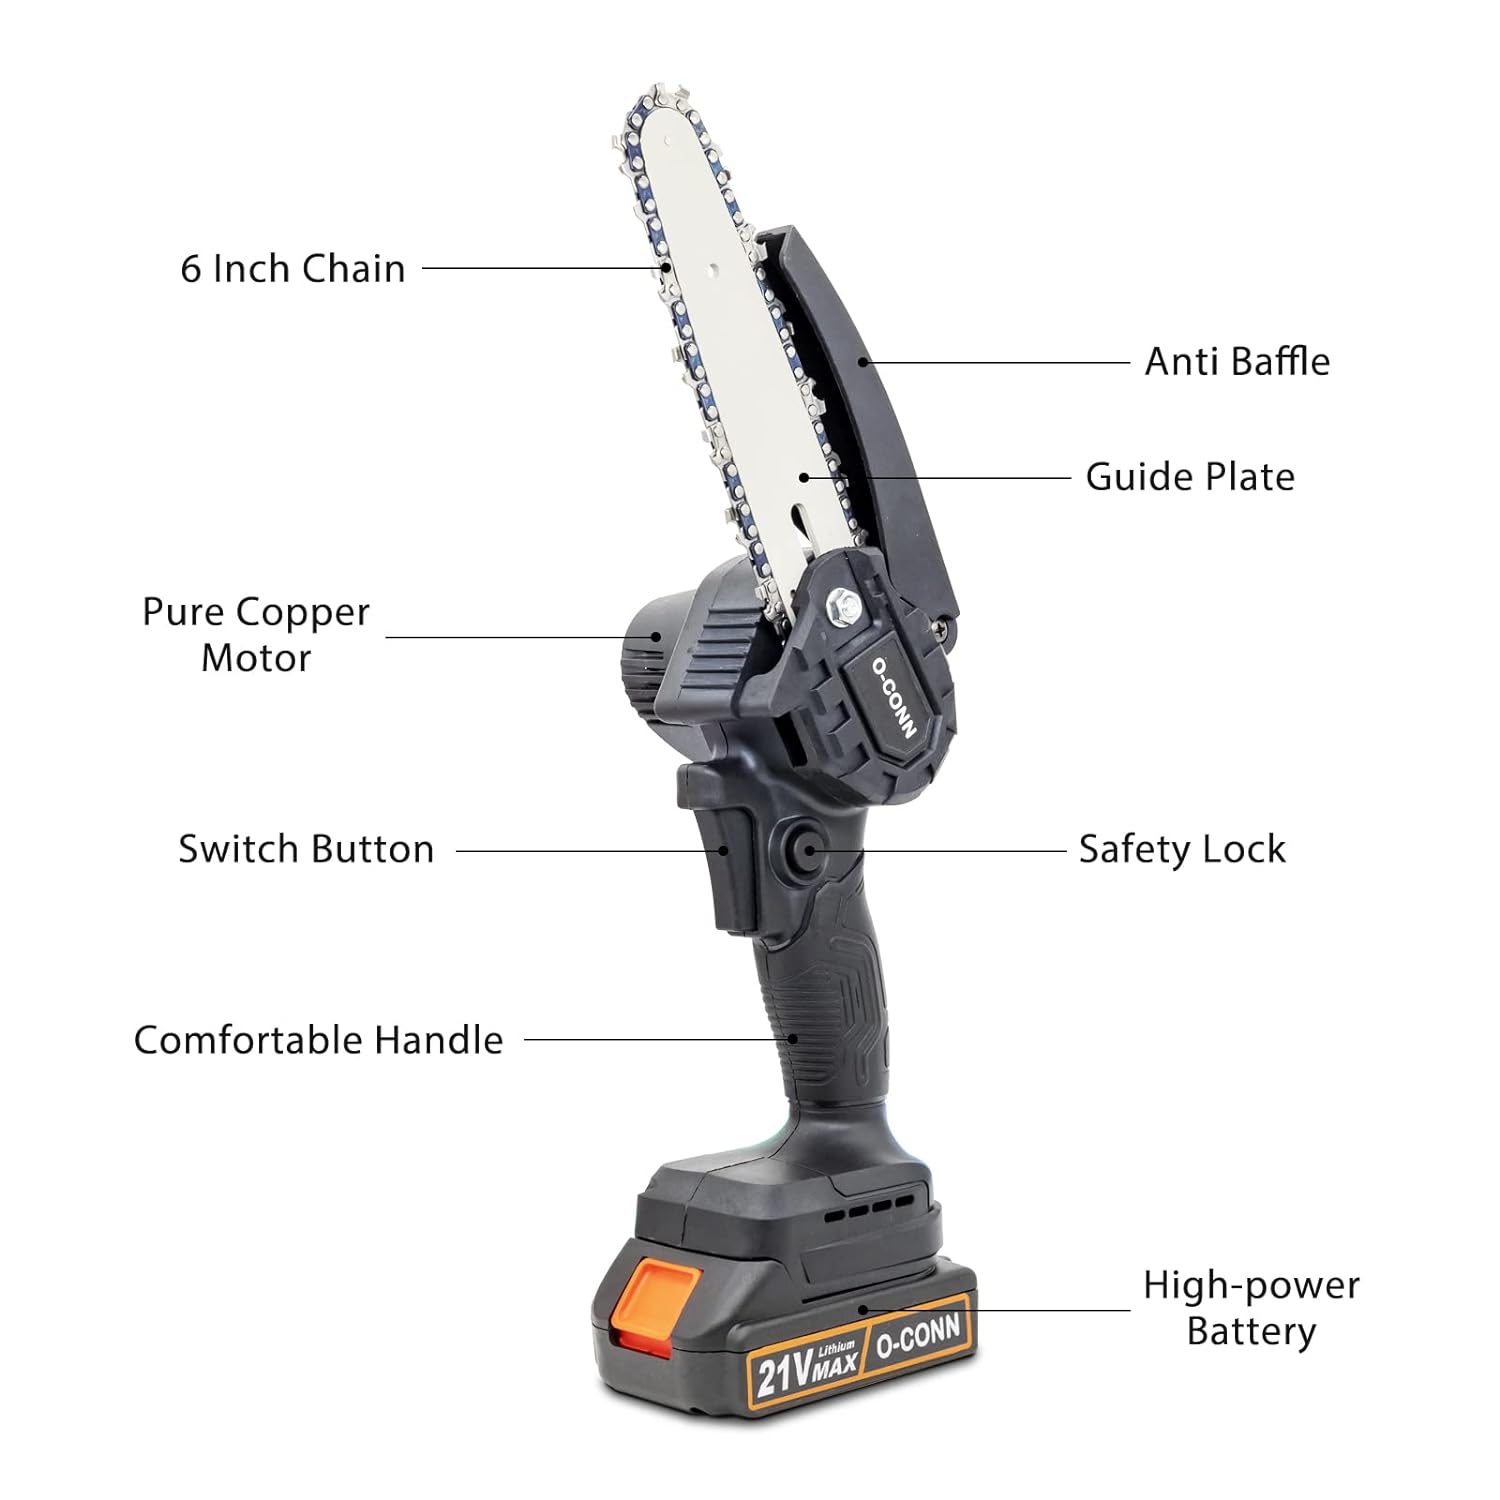 Mini Chainsaw 6 Inch, O-CONN Cordless Mini Chainsaw 24V Battery Powered w/ 2.0Ah Battery and Charger, Handheld Portable Electric Chain Saw, for Tree Trimming Branch Wood Cutting (1 Battery 1 Chain)